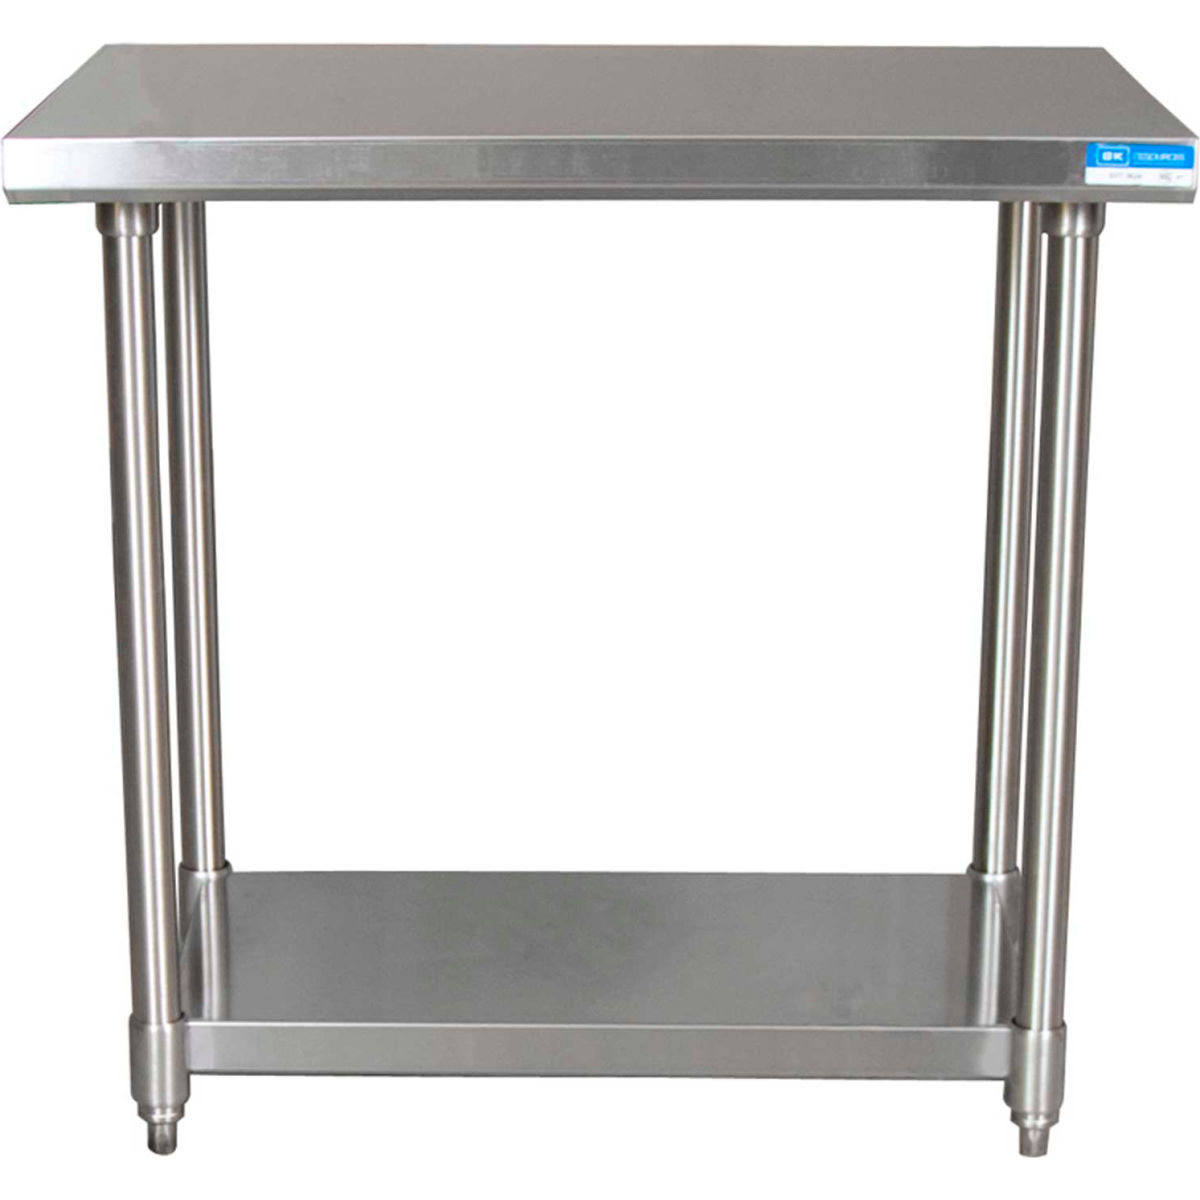 Picture of BK Resources B1516210 16 Gauge 304 Series Stainless Workbench with Adjustable Undershelf - 36 x 30 in.